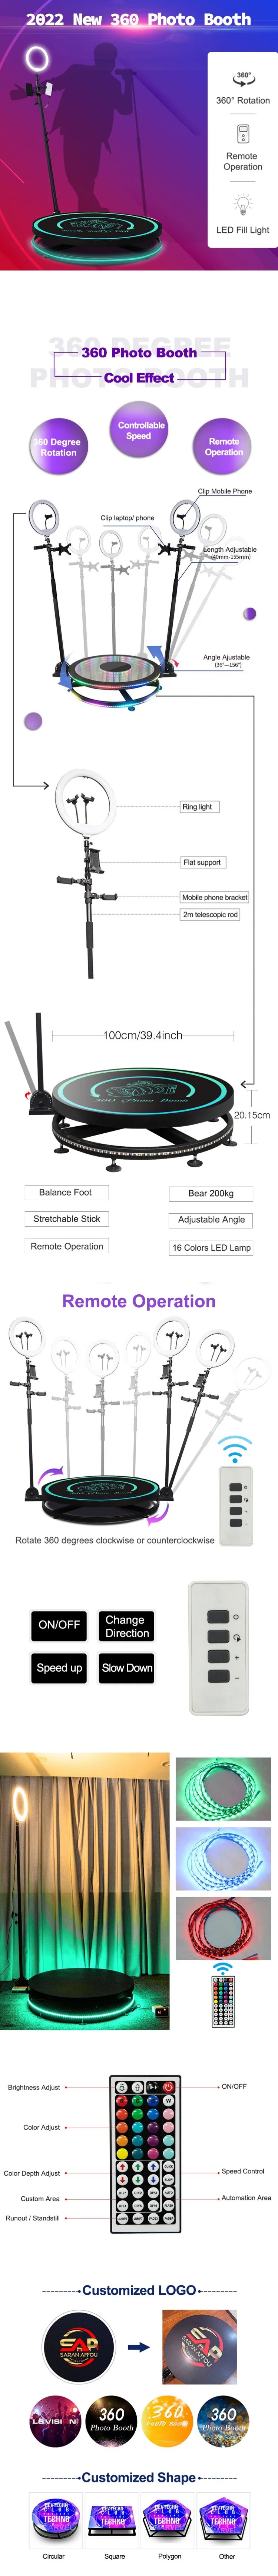 Wholesale High Quality Spin 360 LED Wedding